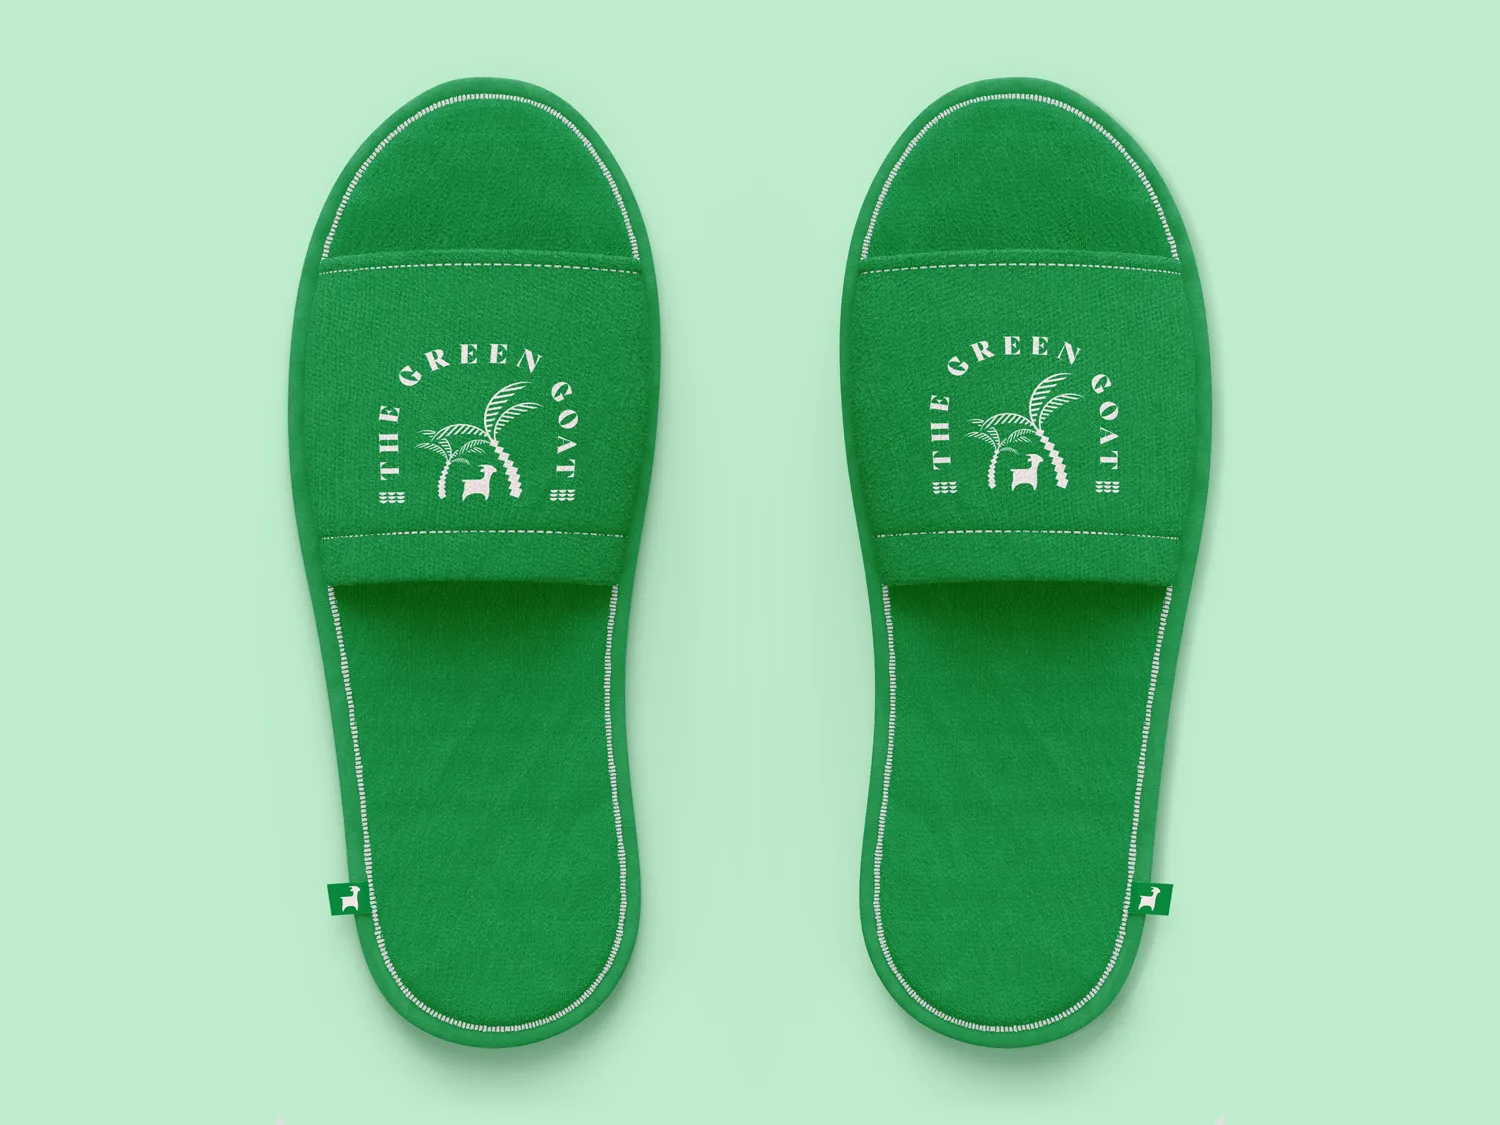 The Green Goat Slippers